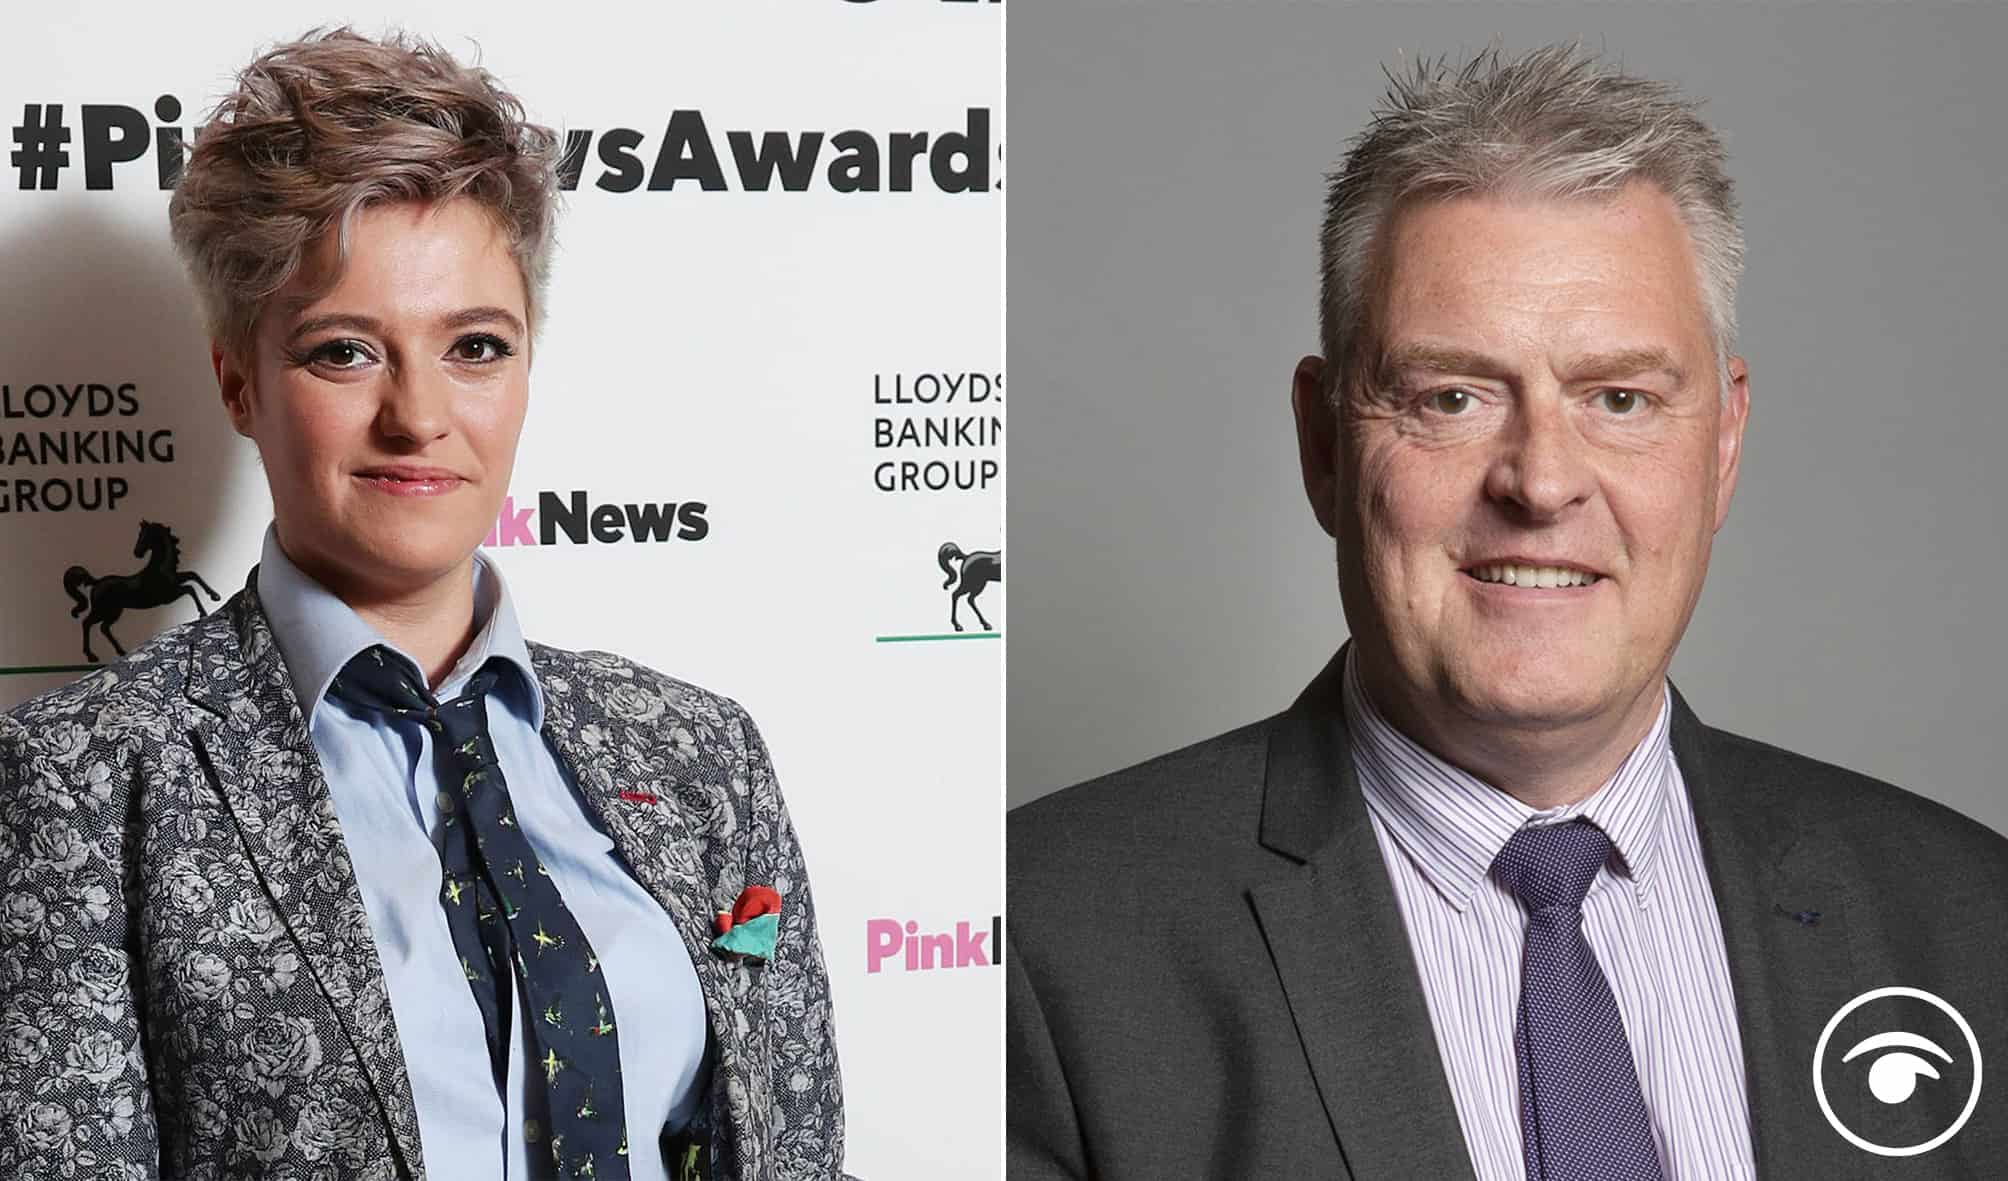 Watch: Jack Monroe claims ‘outright libel’ after Lee Anderson slams her in video